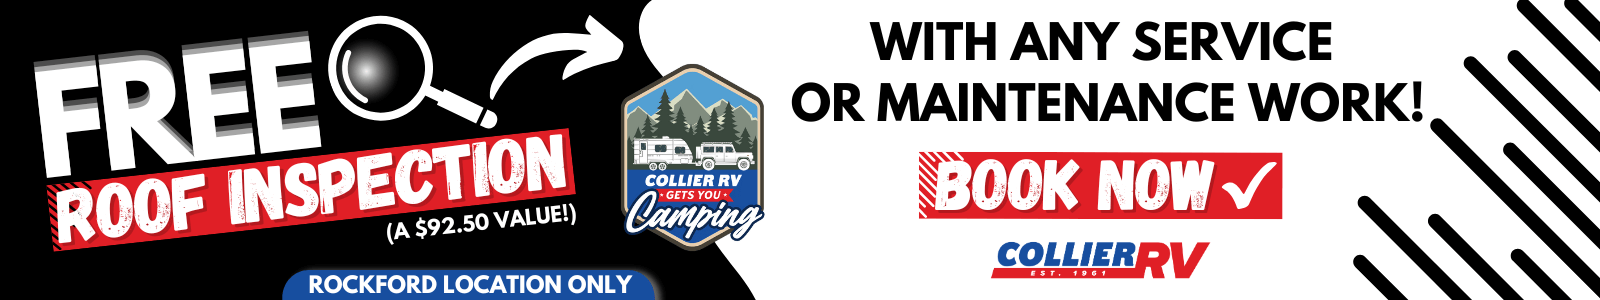 RV service - Free roof inspection with any service or maintenance